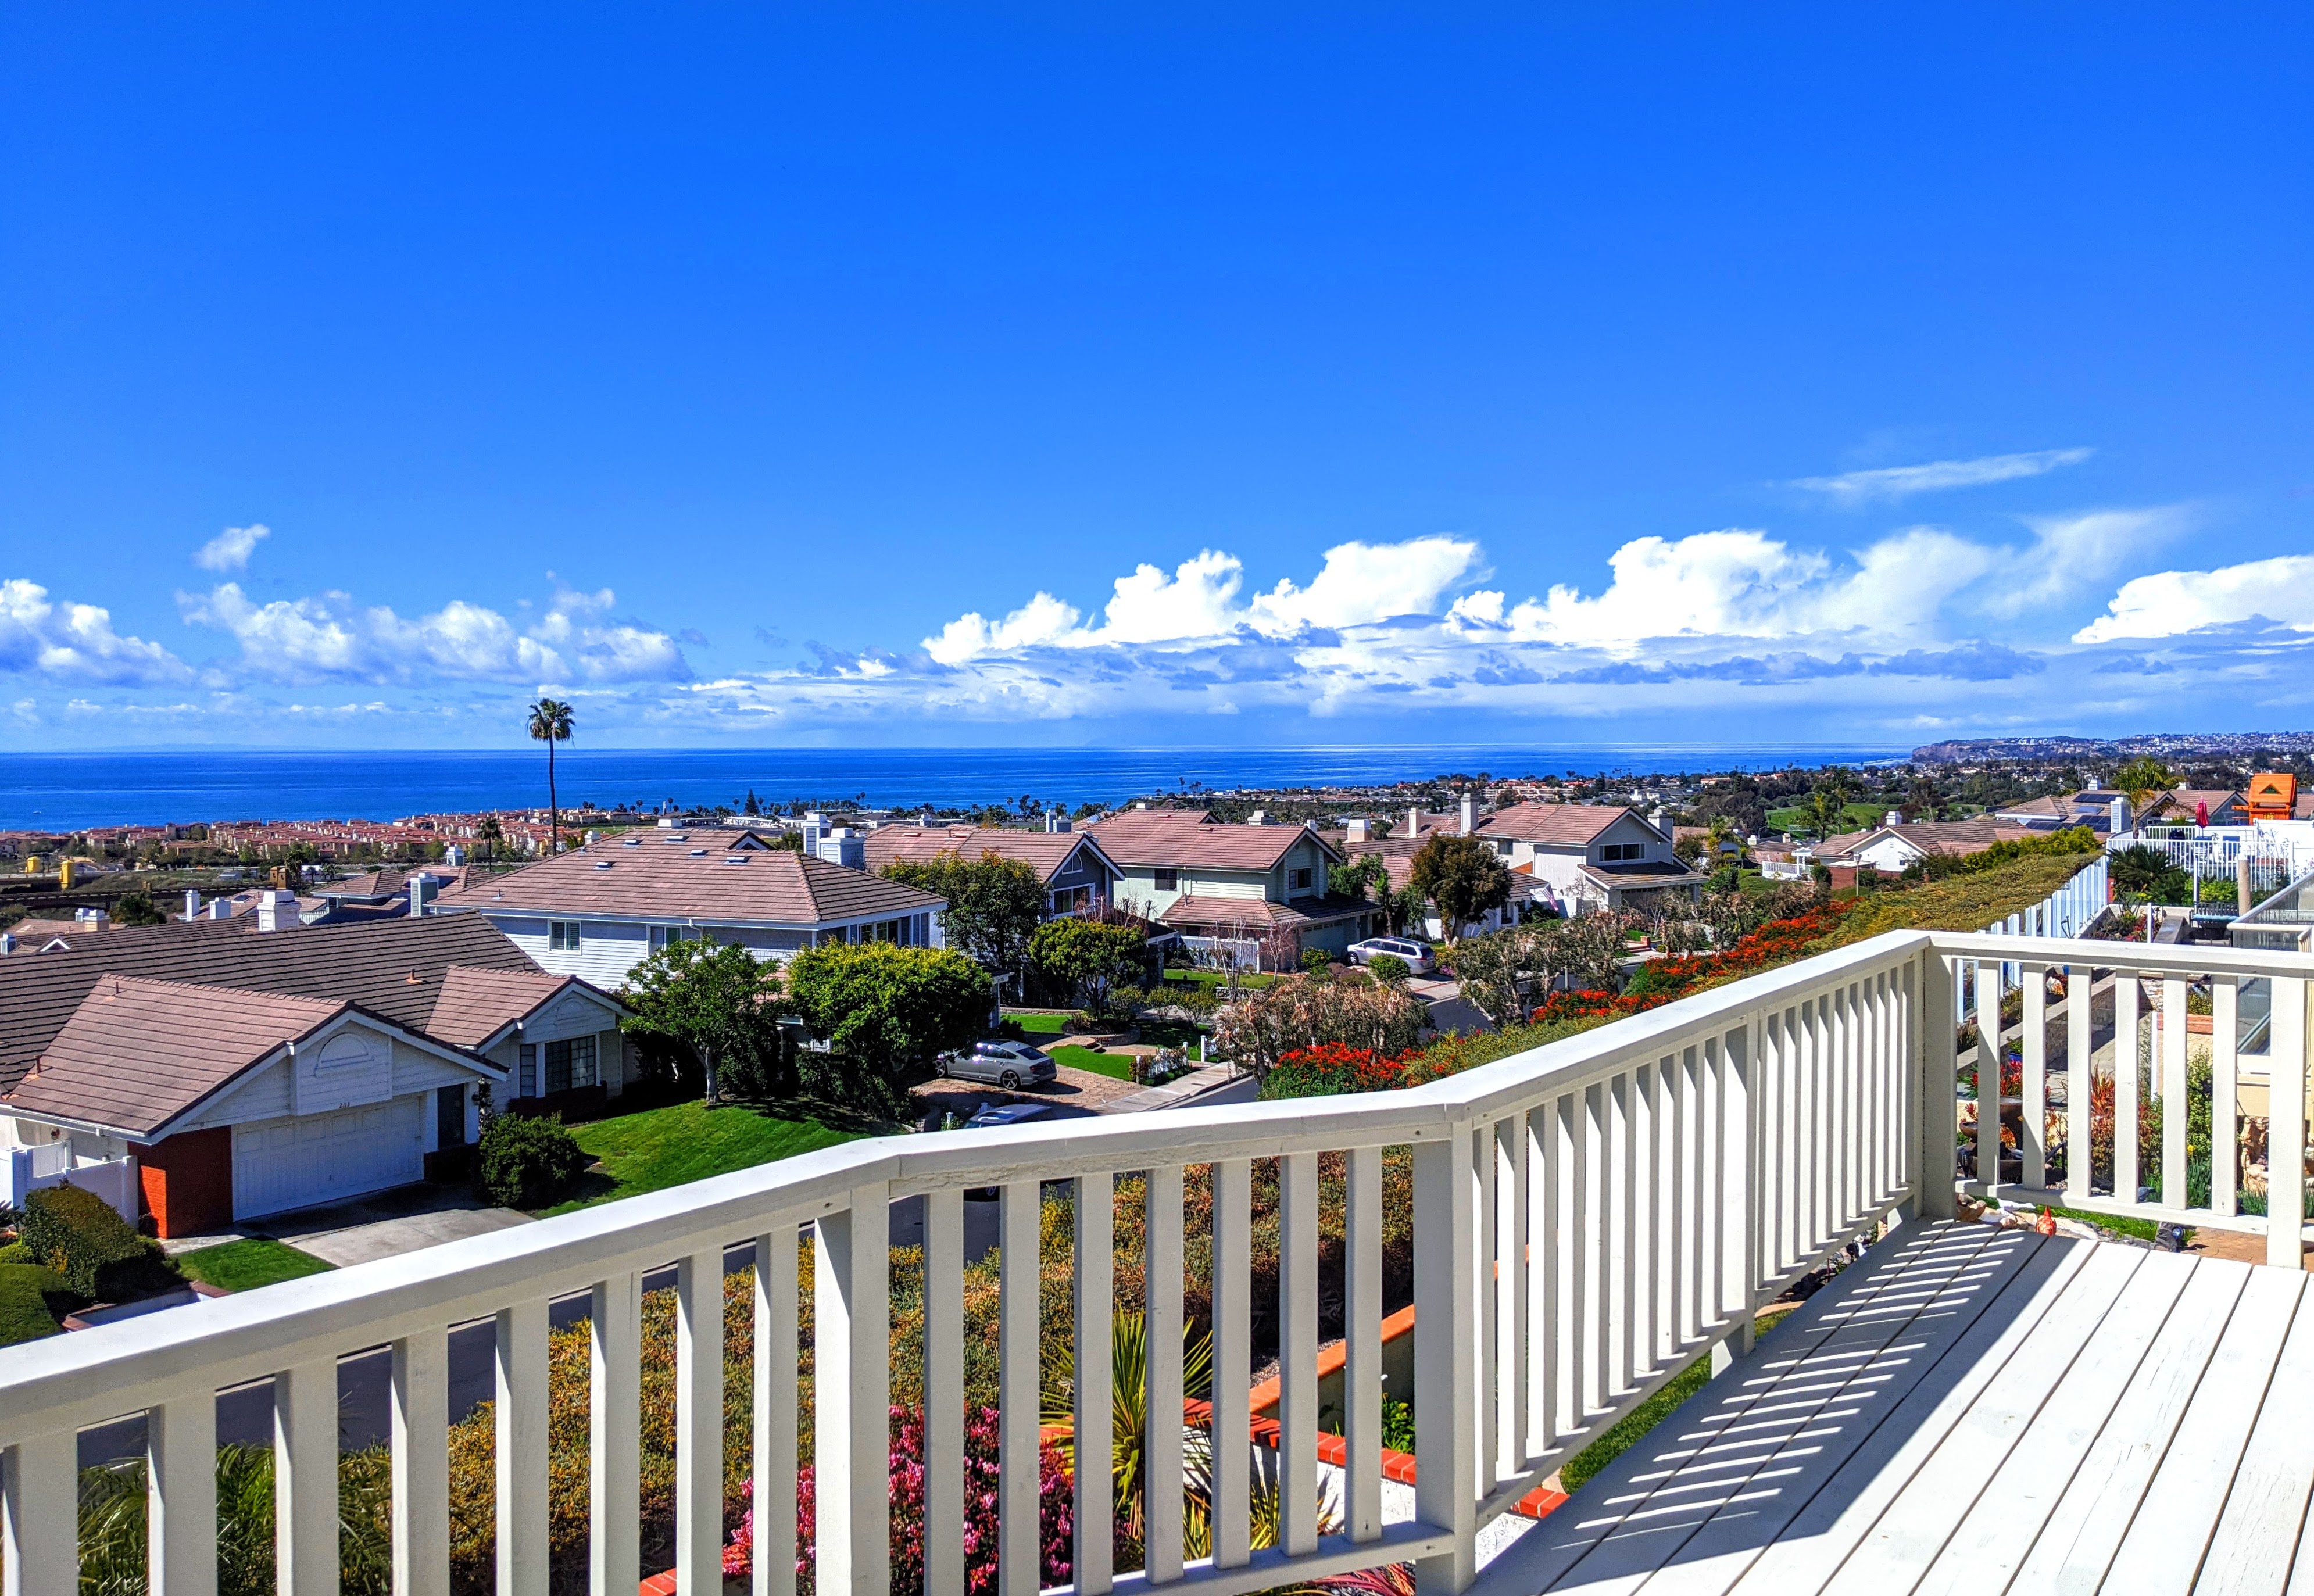 WELCOME TO PARADISE 
FOR SALE: OCEAN VIEW HOME IN SAN CLEMENTE, CA